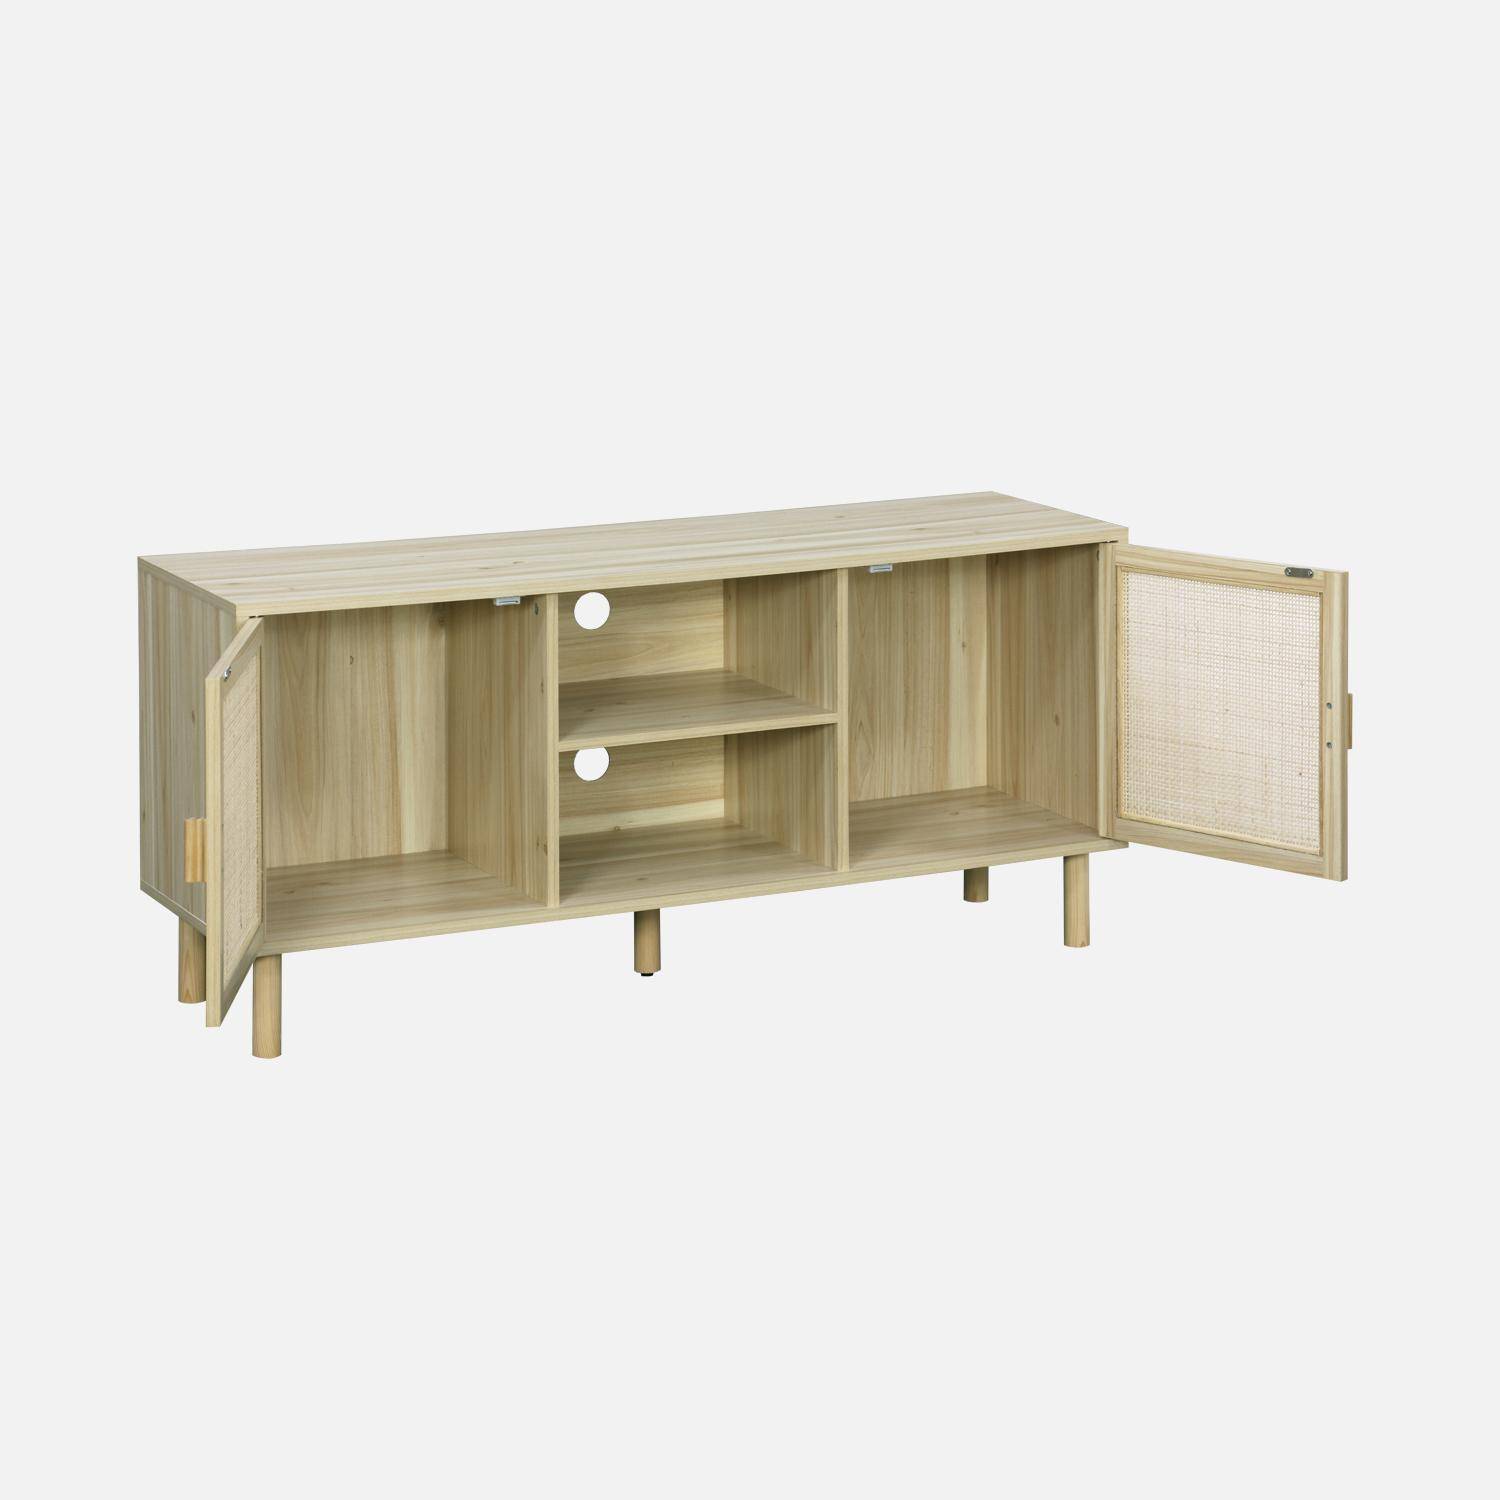 Cane and wood effect TV stand, 2 doors and 1 shelf, 120cm Photo3